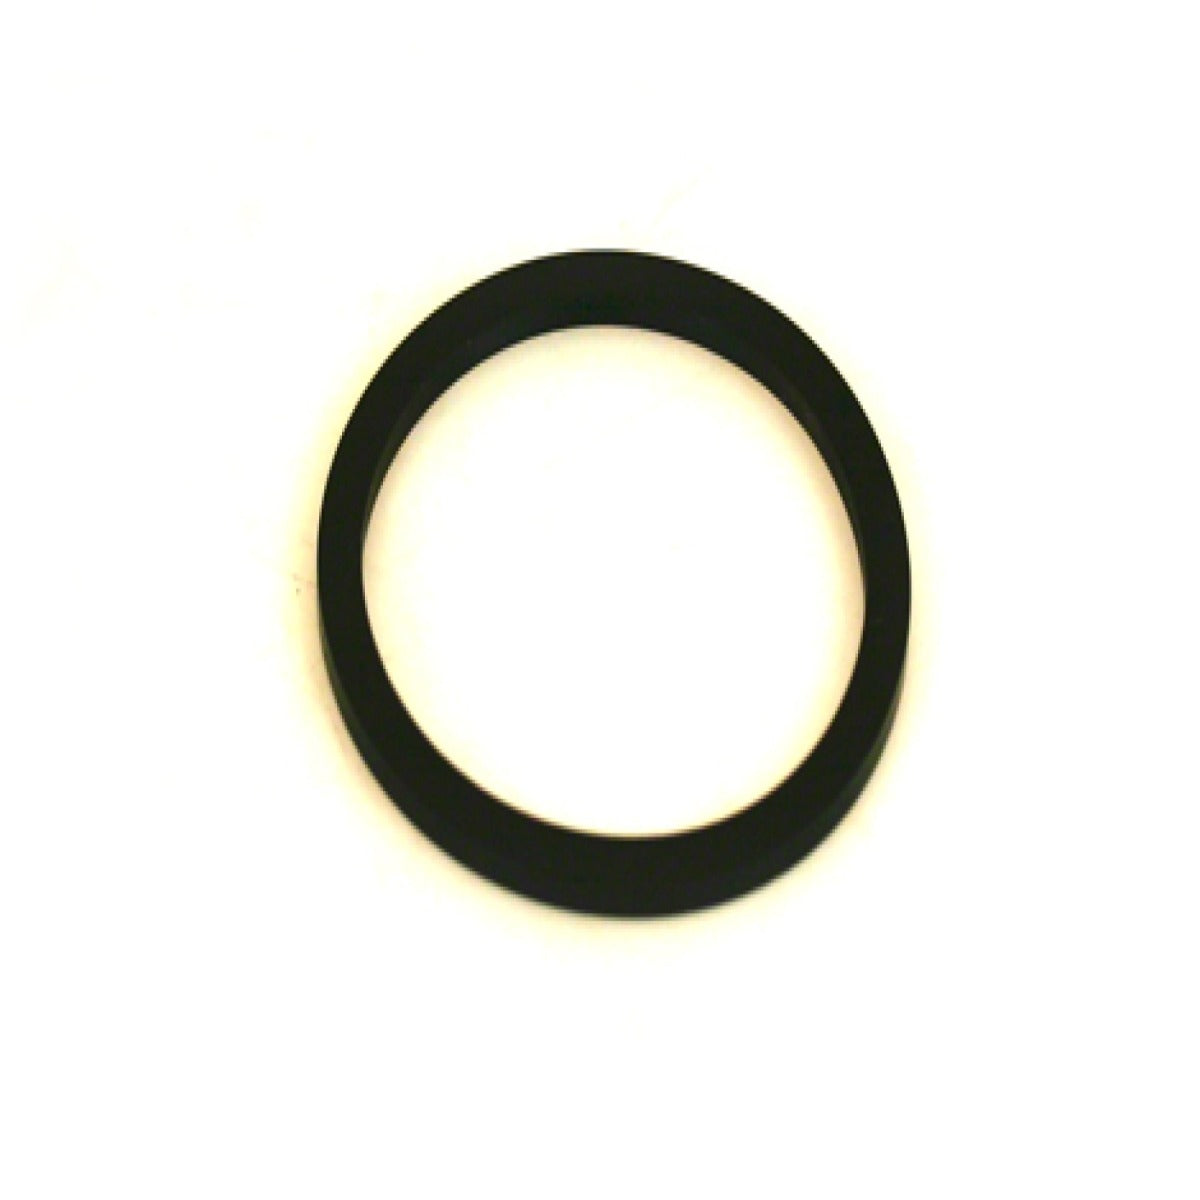 2 x Seals Gaskets Rubber washers O-rings for level indicator gauge (4-hole tank)